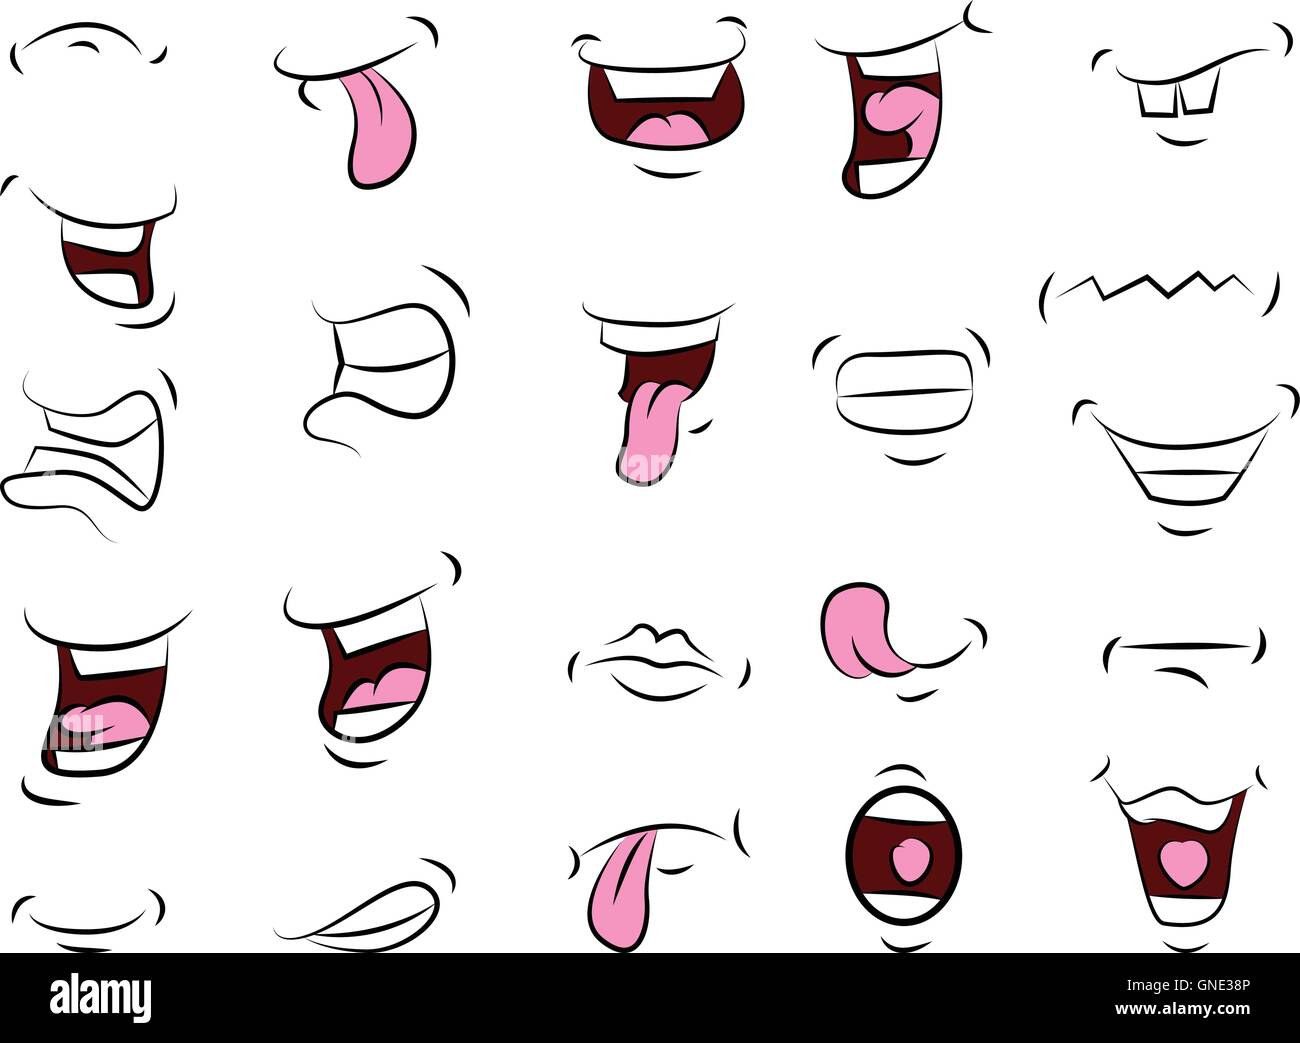 Set of mouths cartoon for your design Stock Vector